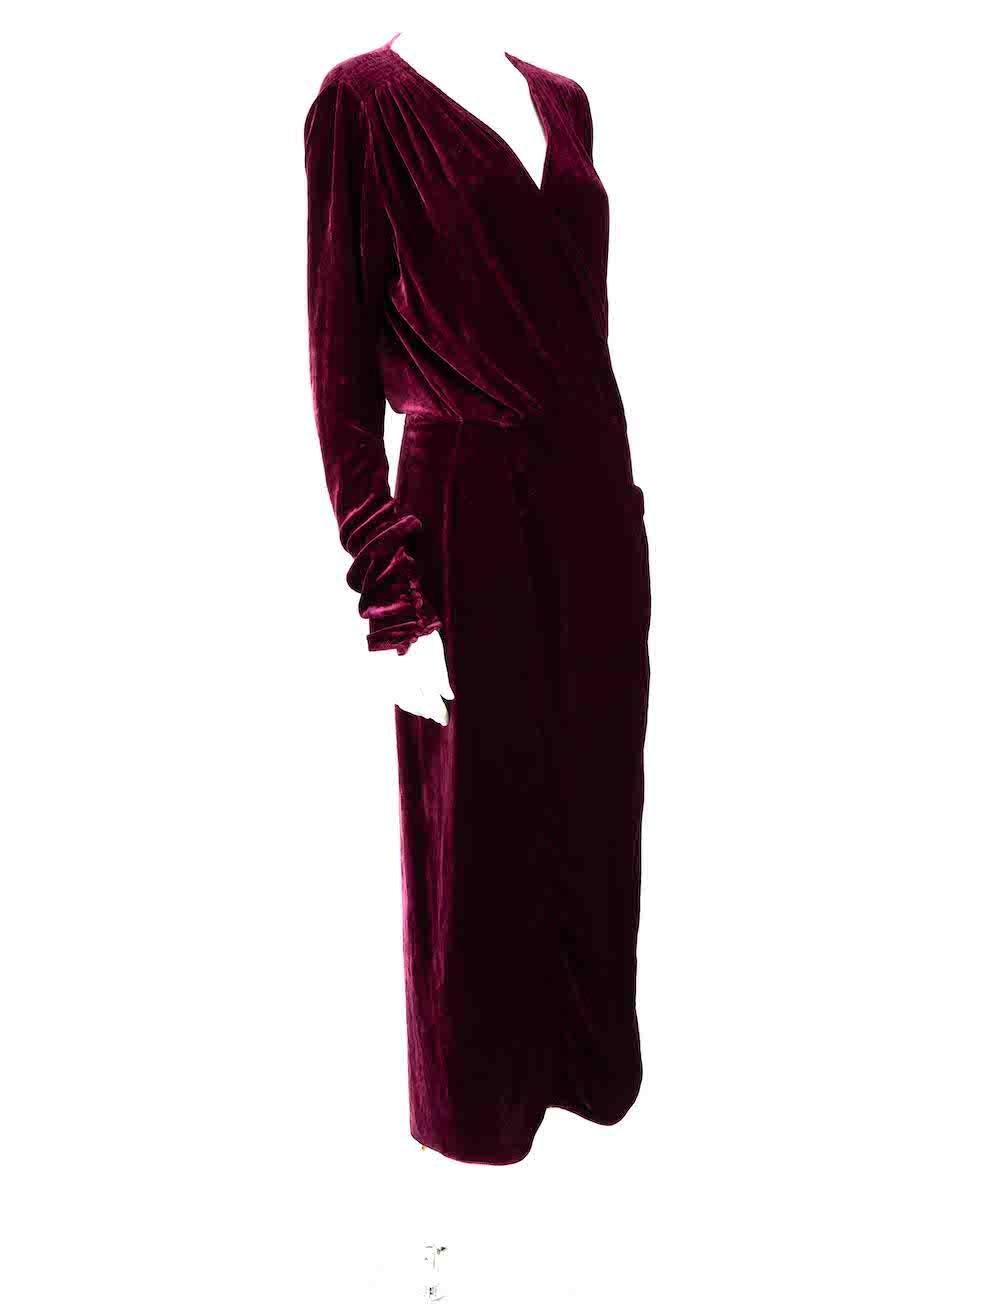 CONDITION is Very good. Minimal wear to coat is evident. Minimal scuffs to front right near waistline on this used The Attico designer resale item.
 
 
 
 Details
 
 
 Purple
 
 Velvet
 
 Nightgown
 
 Tie fastening
 
 V-neck
 
 Long sleeves
 
